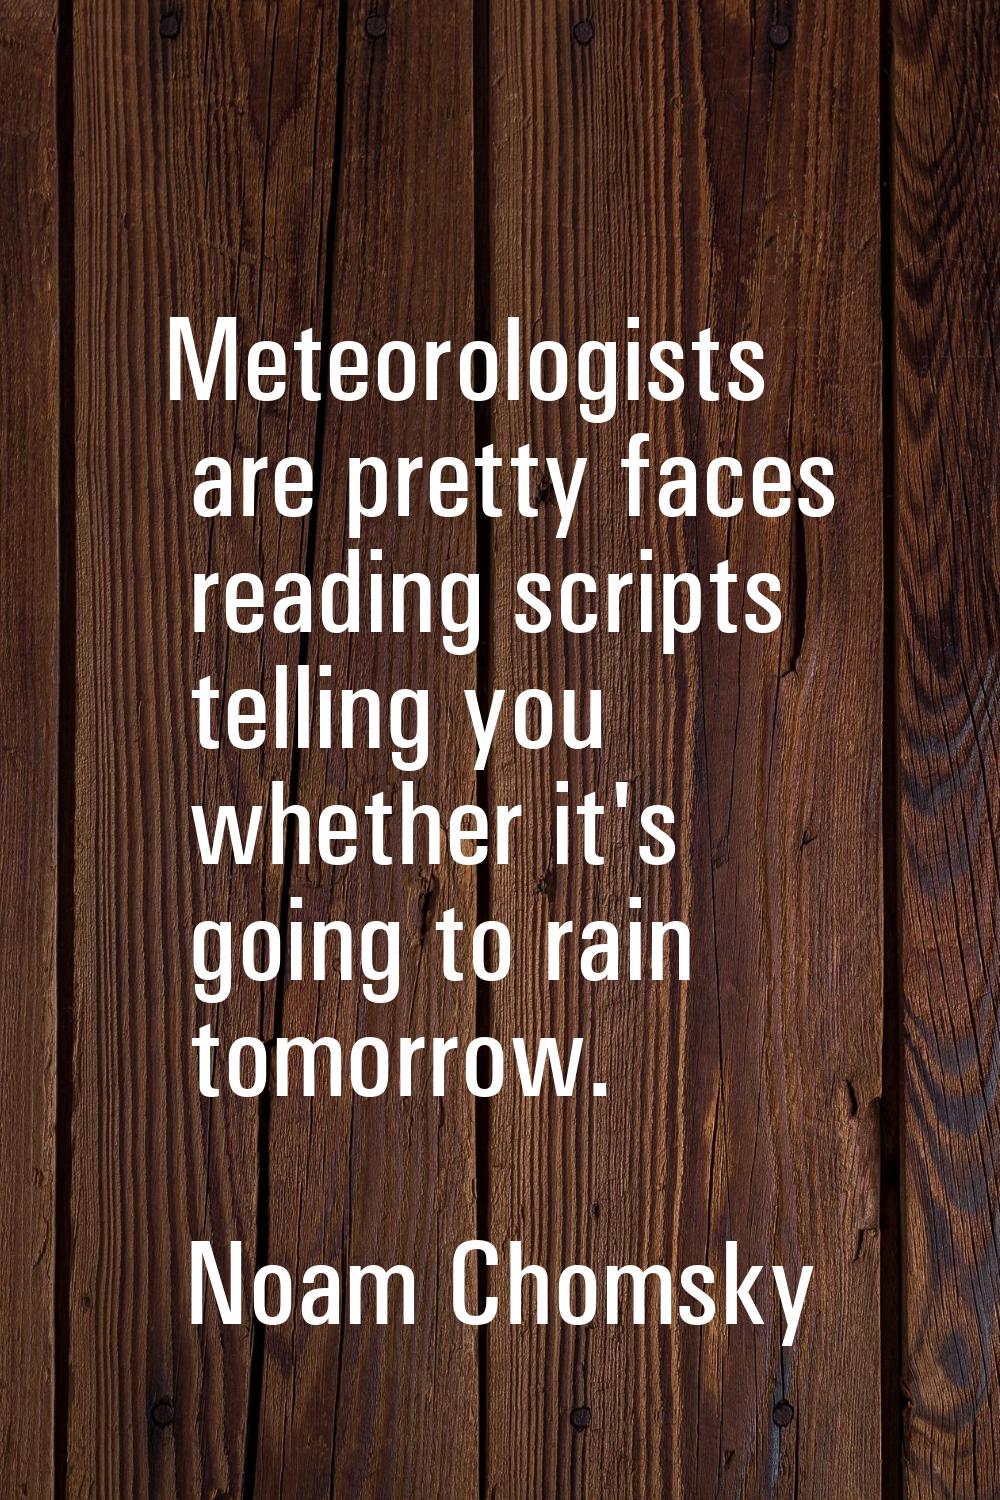 Meteorologists are pretty faces reading scripts telling you whether it's going to rain tomorrow.